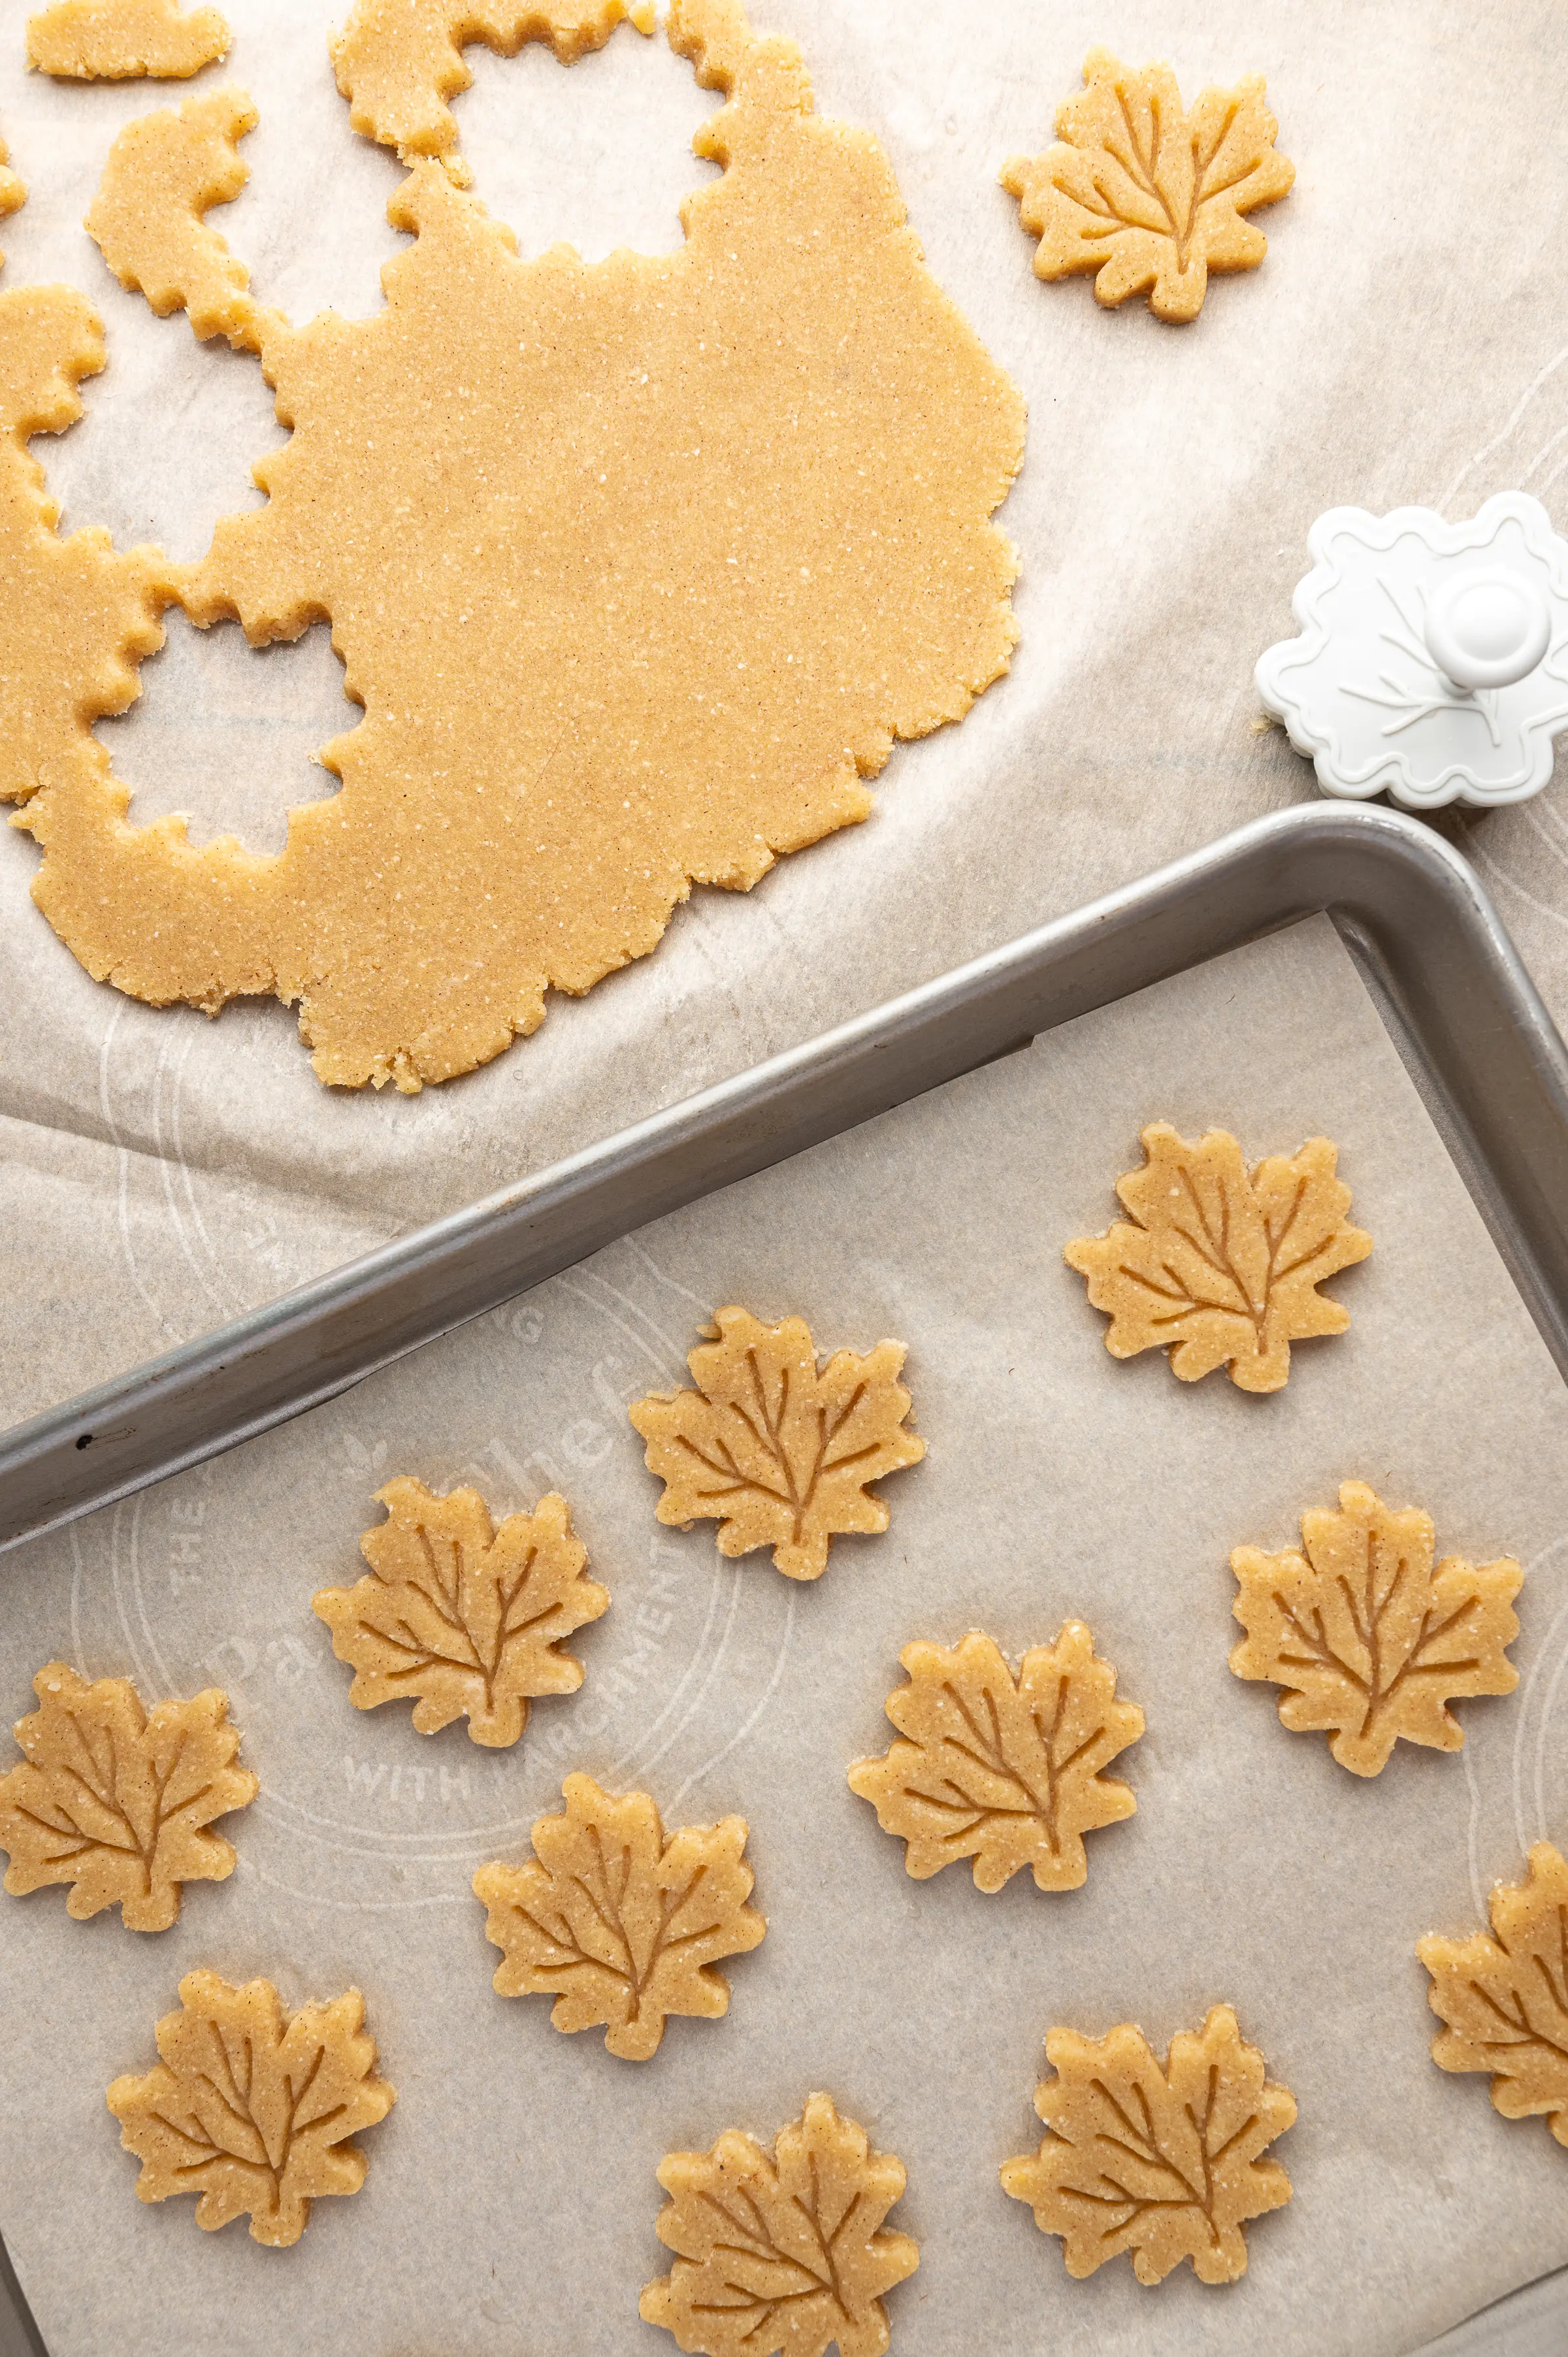 Cookie tray of unbaked maple leaf shaped pie decorations